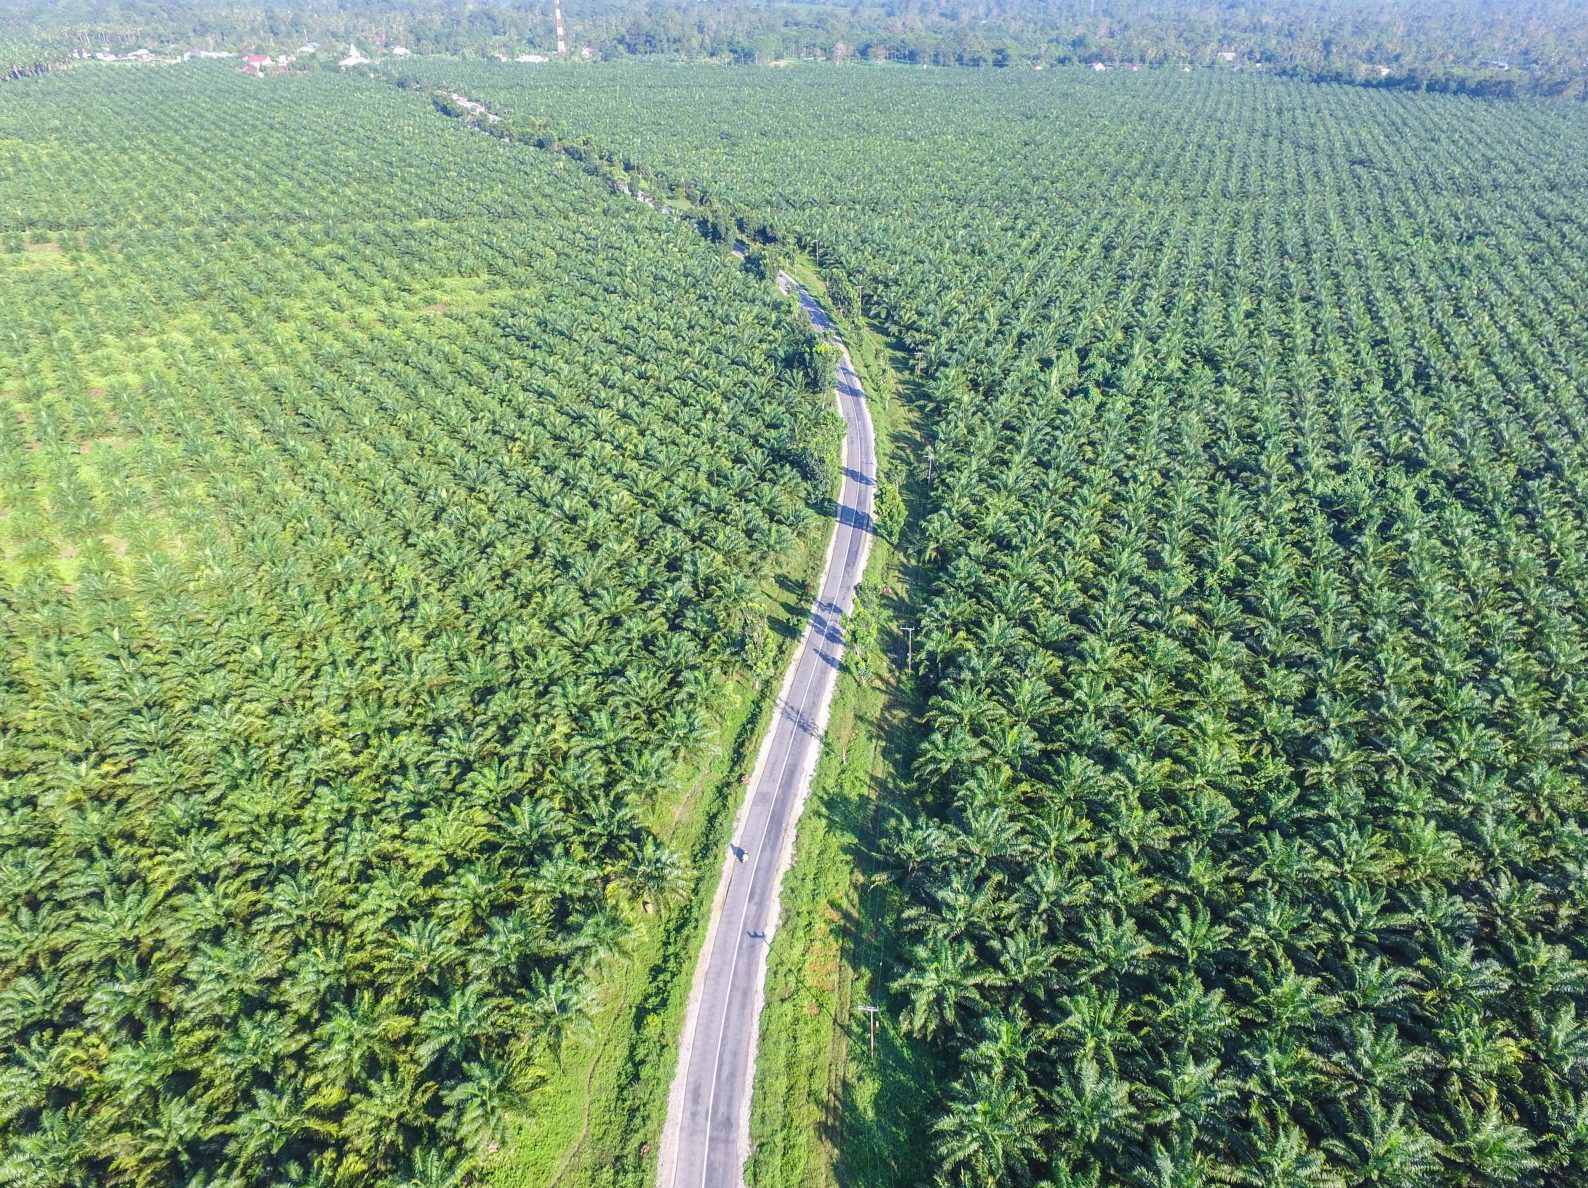 Most Borneo Villages Don't See Oil Palm Payoff